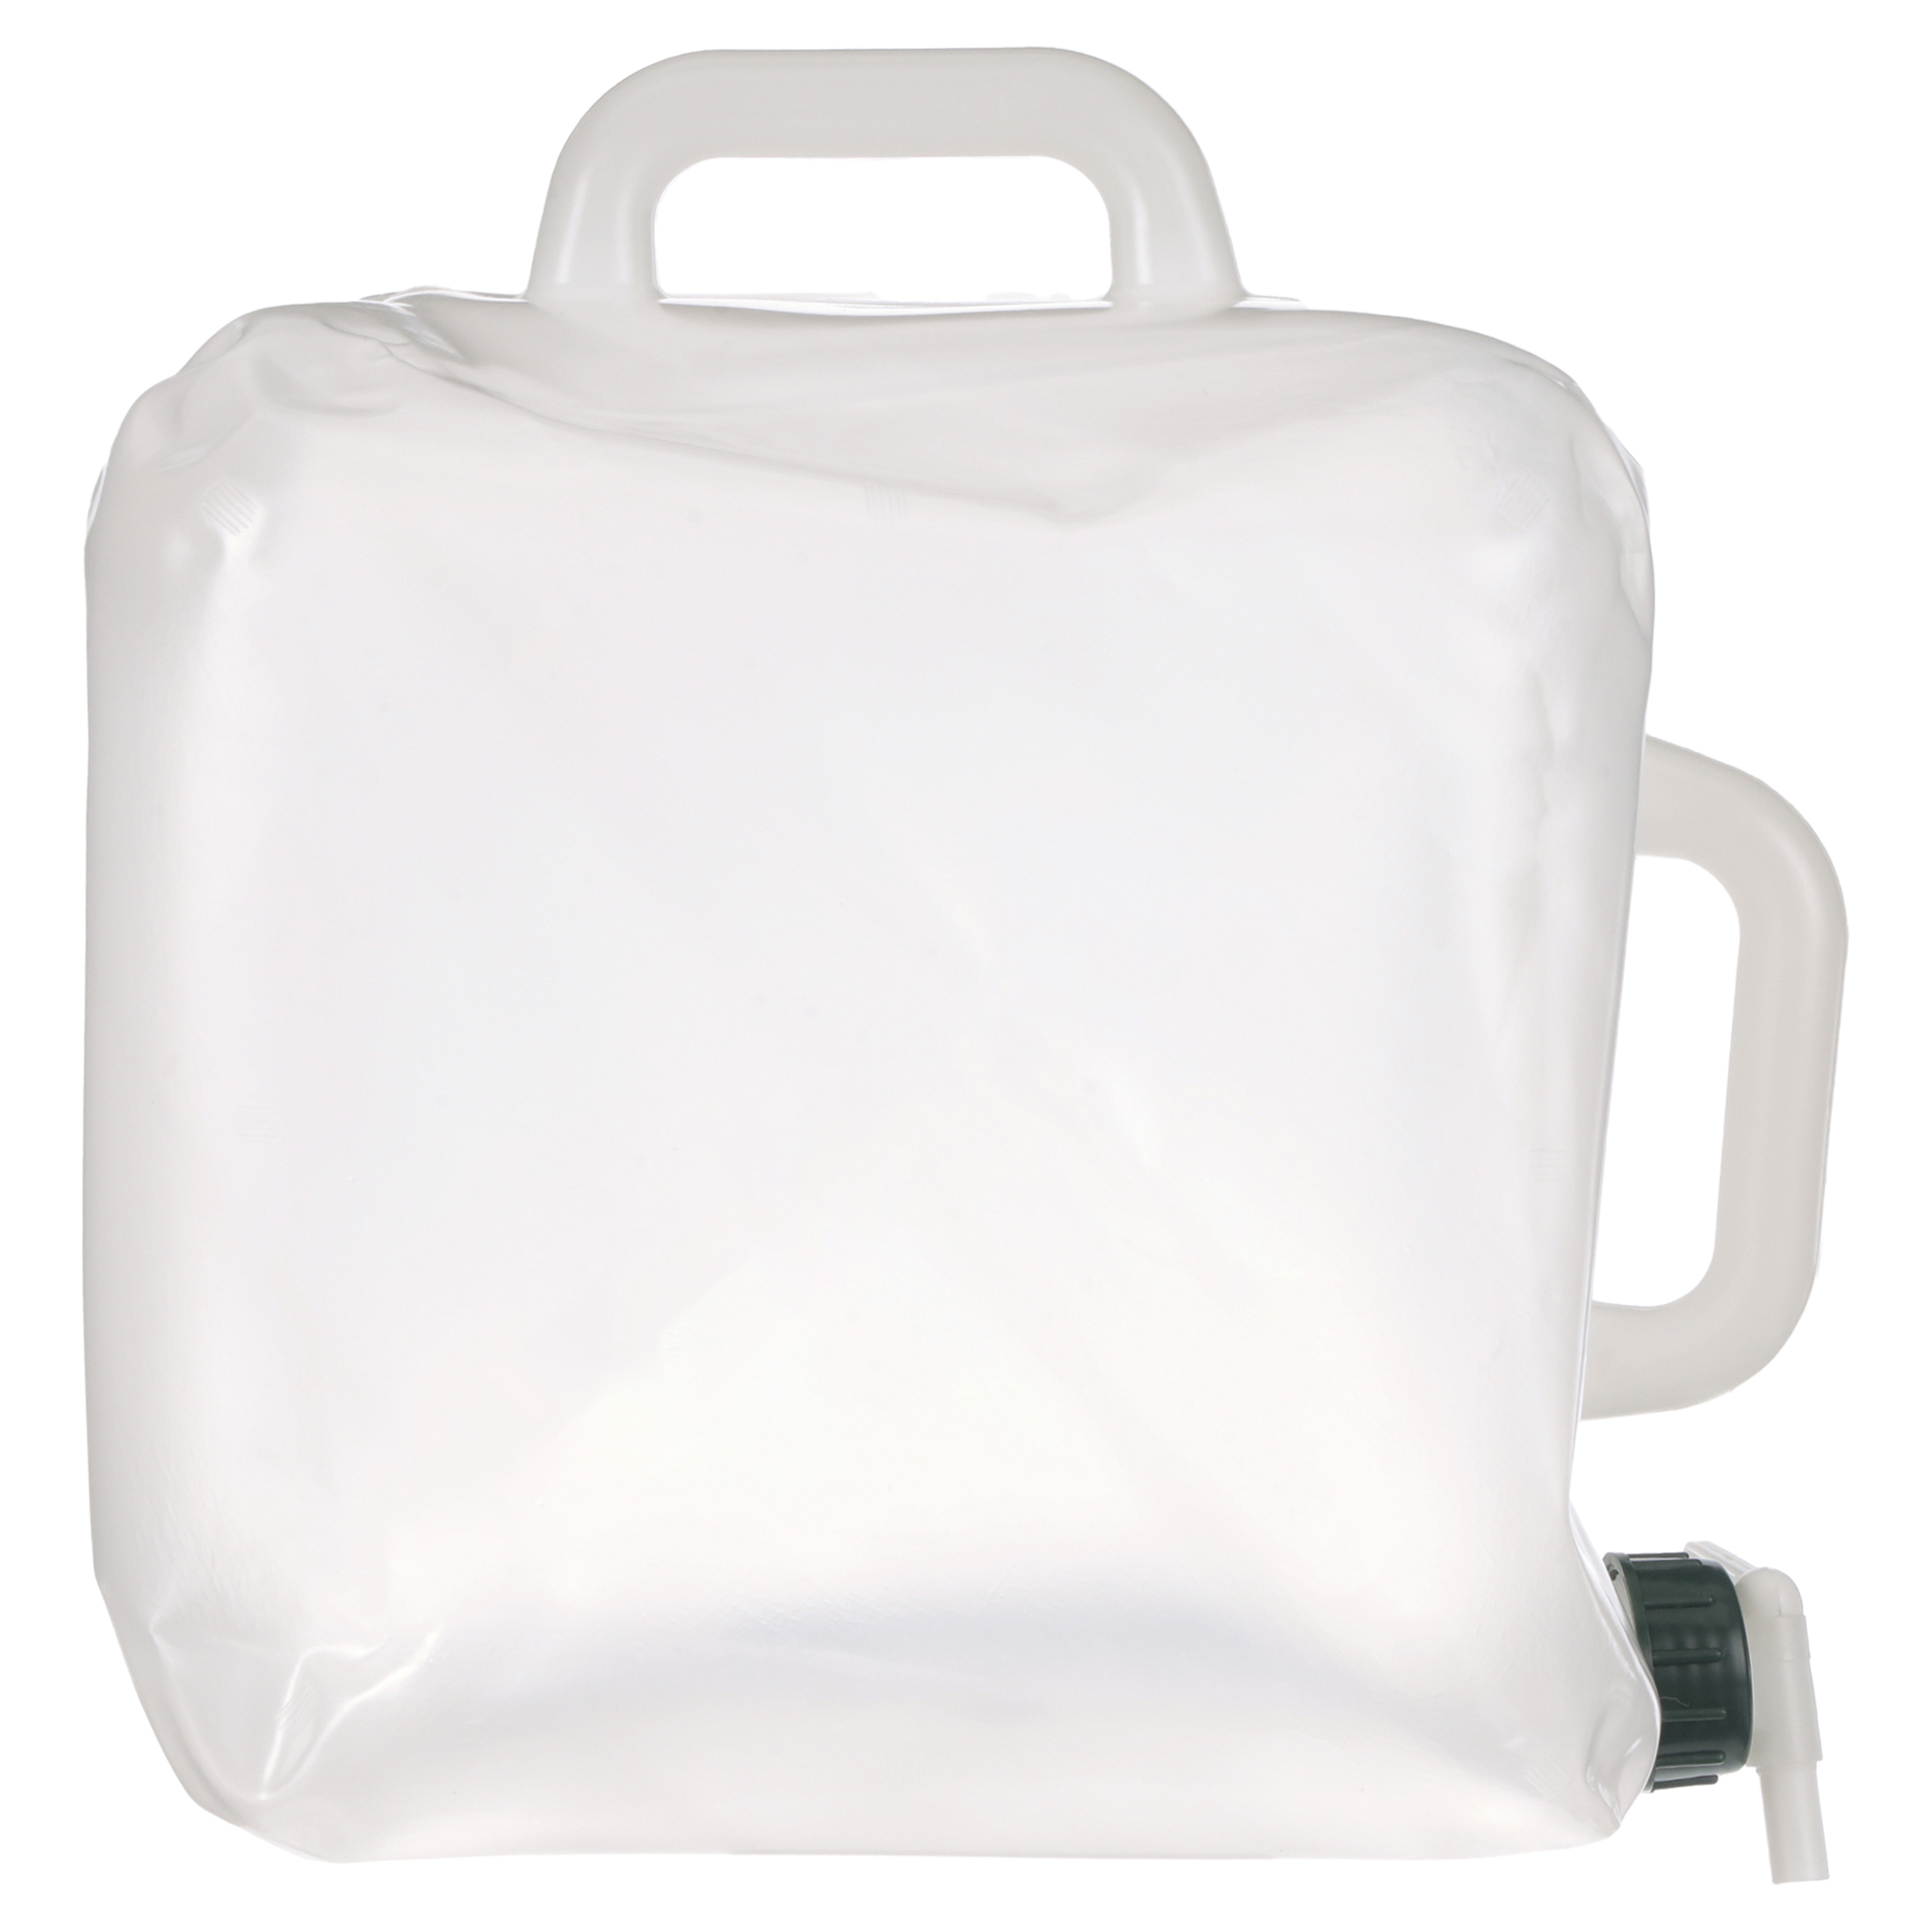 Coleman 5 Gallon Easy Carry Portable Water Carrier with Removable Spigot, Clear - image 9 of 10